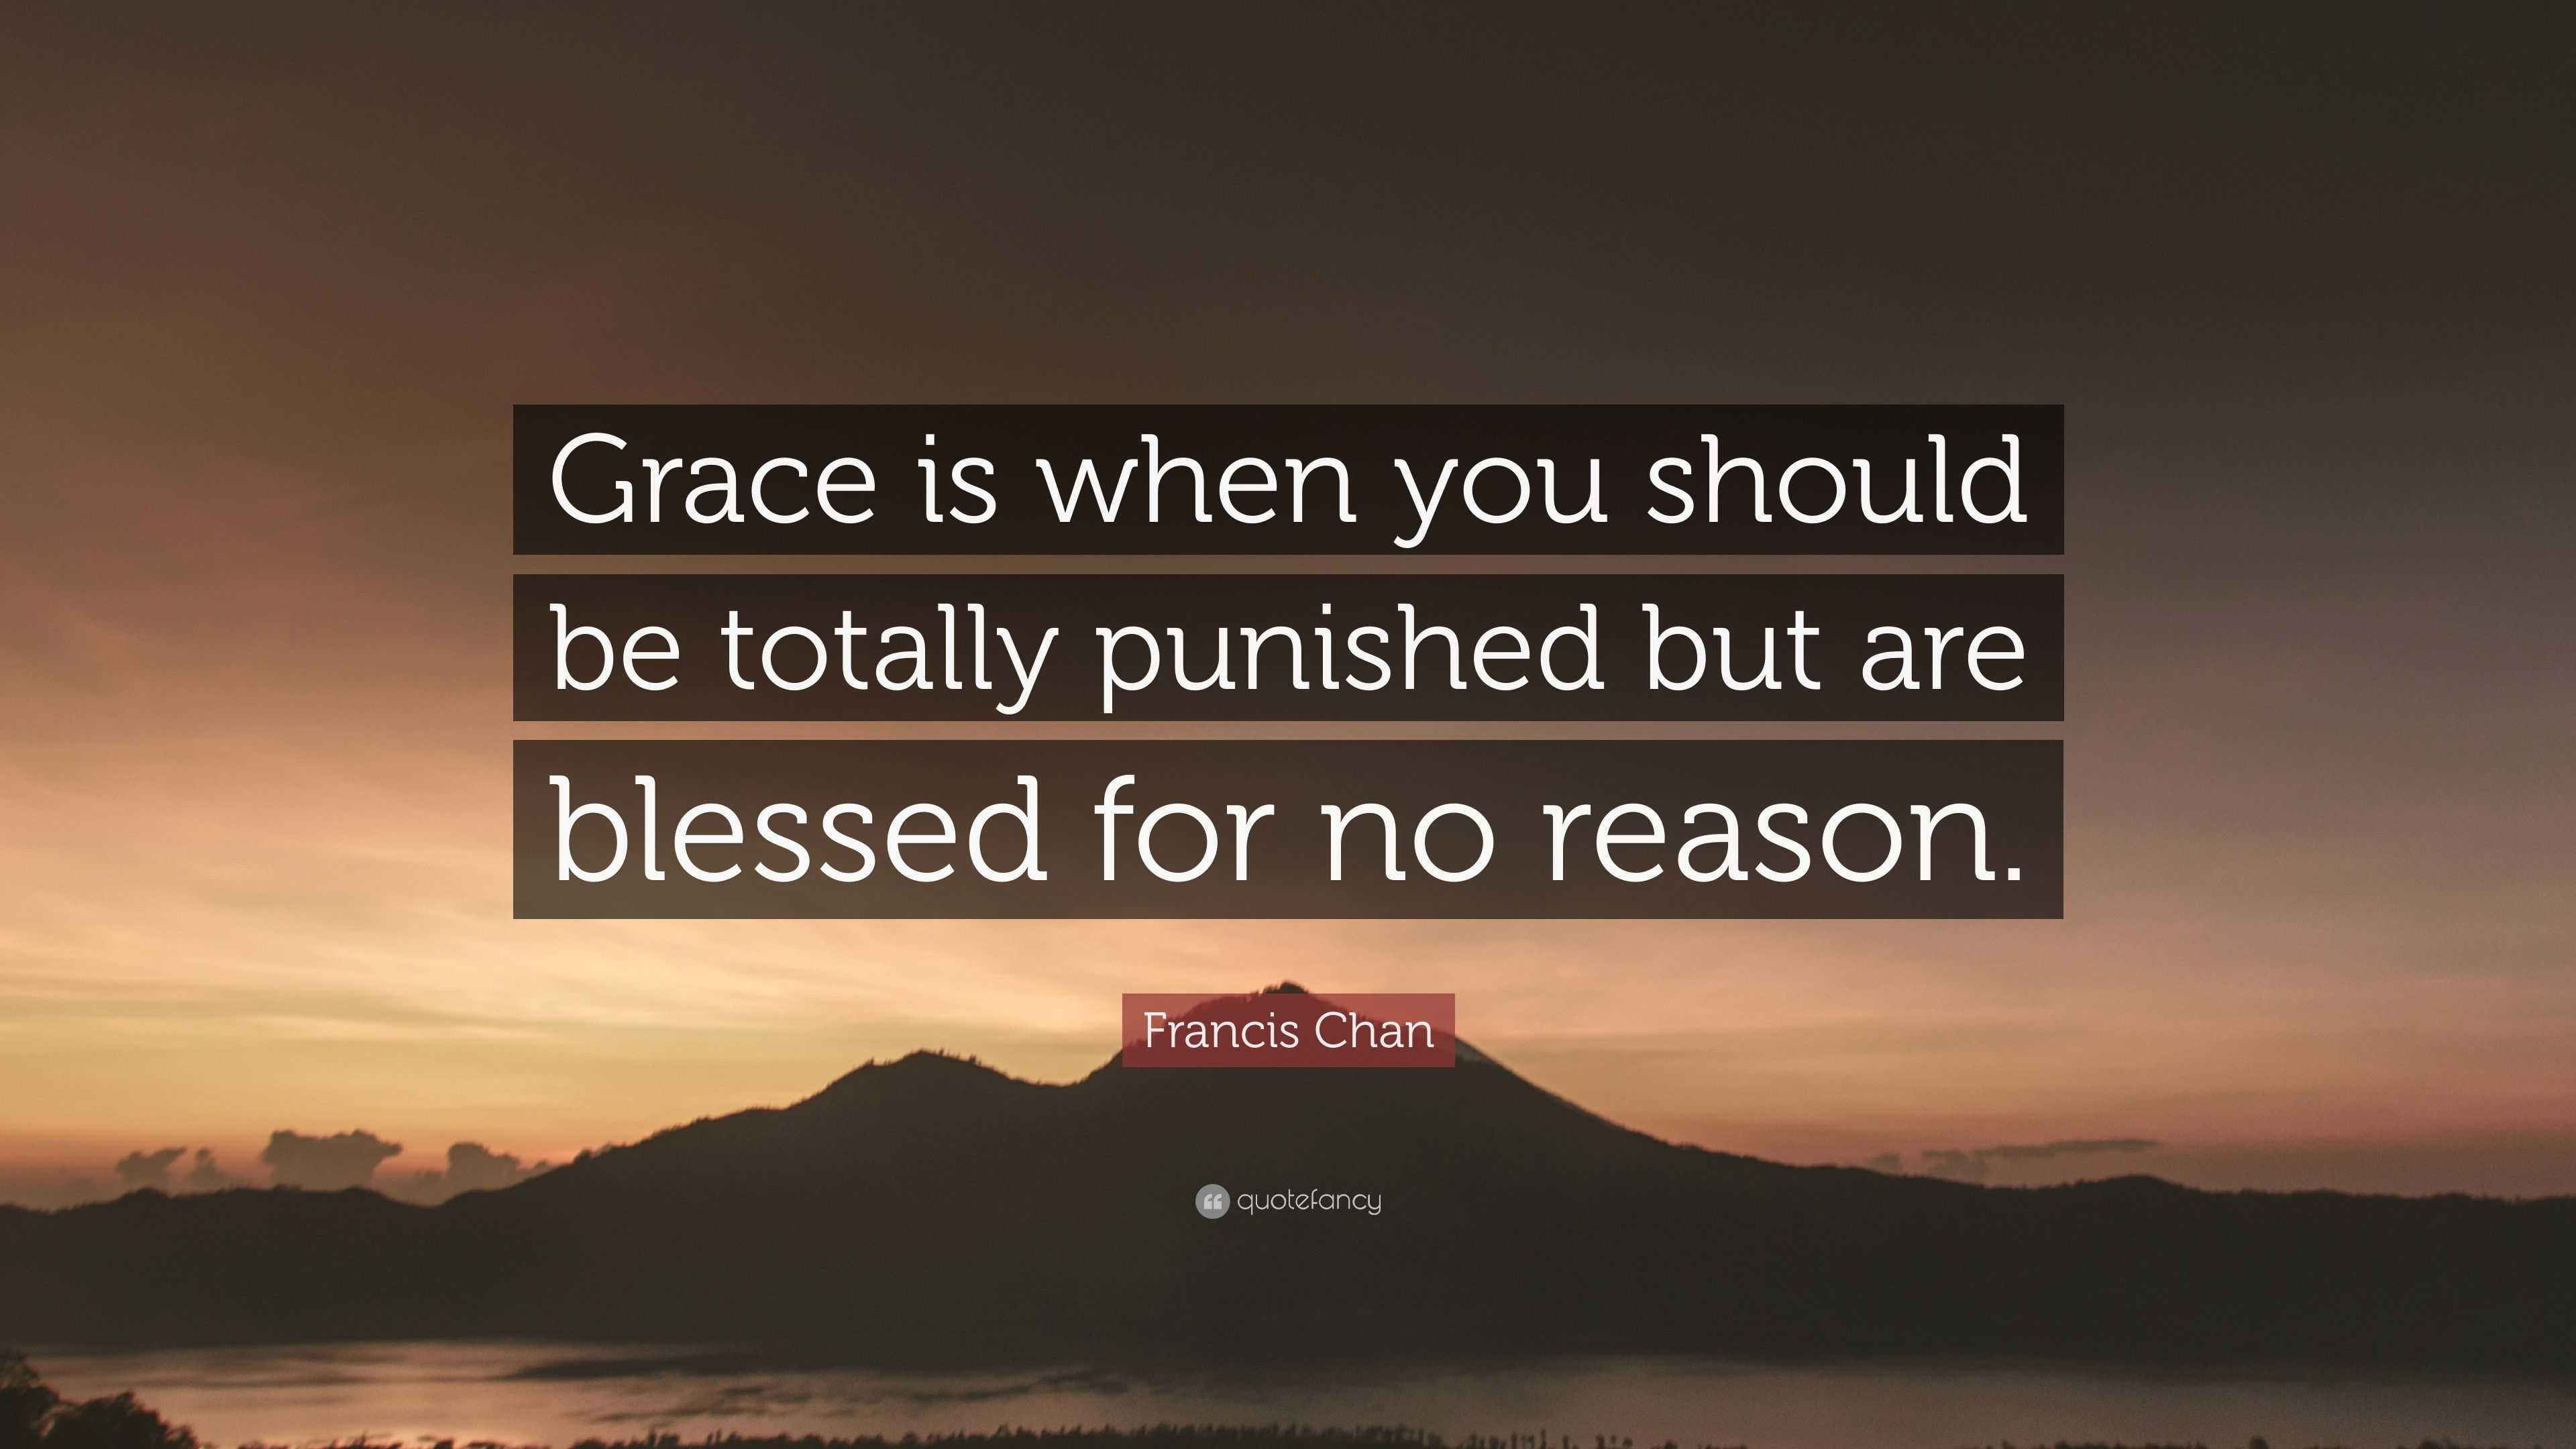 Francis Chan Quote: “Grace is when you should be totally punished but ...